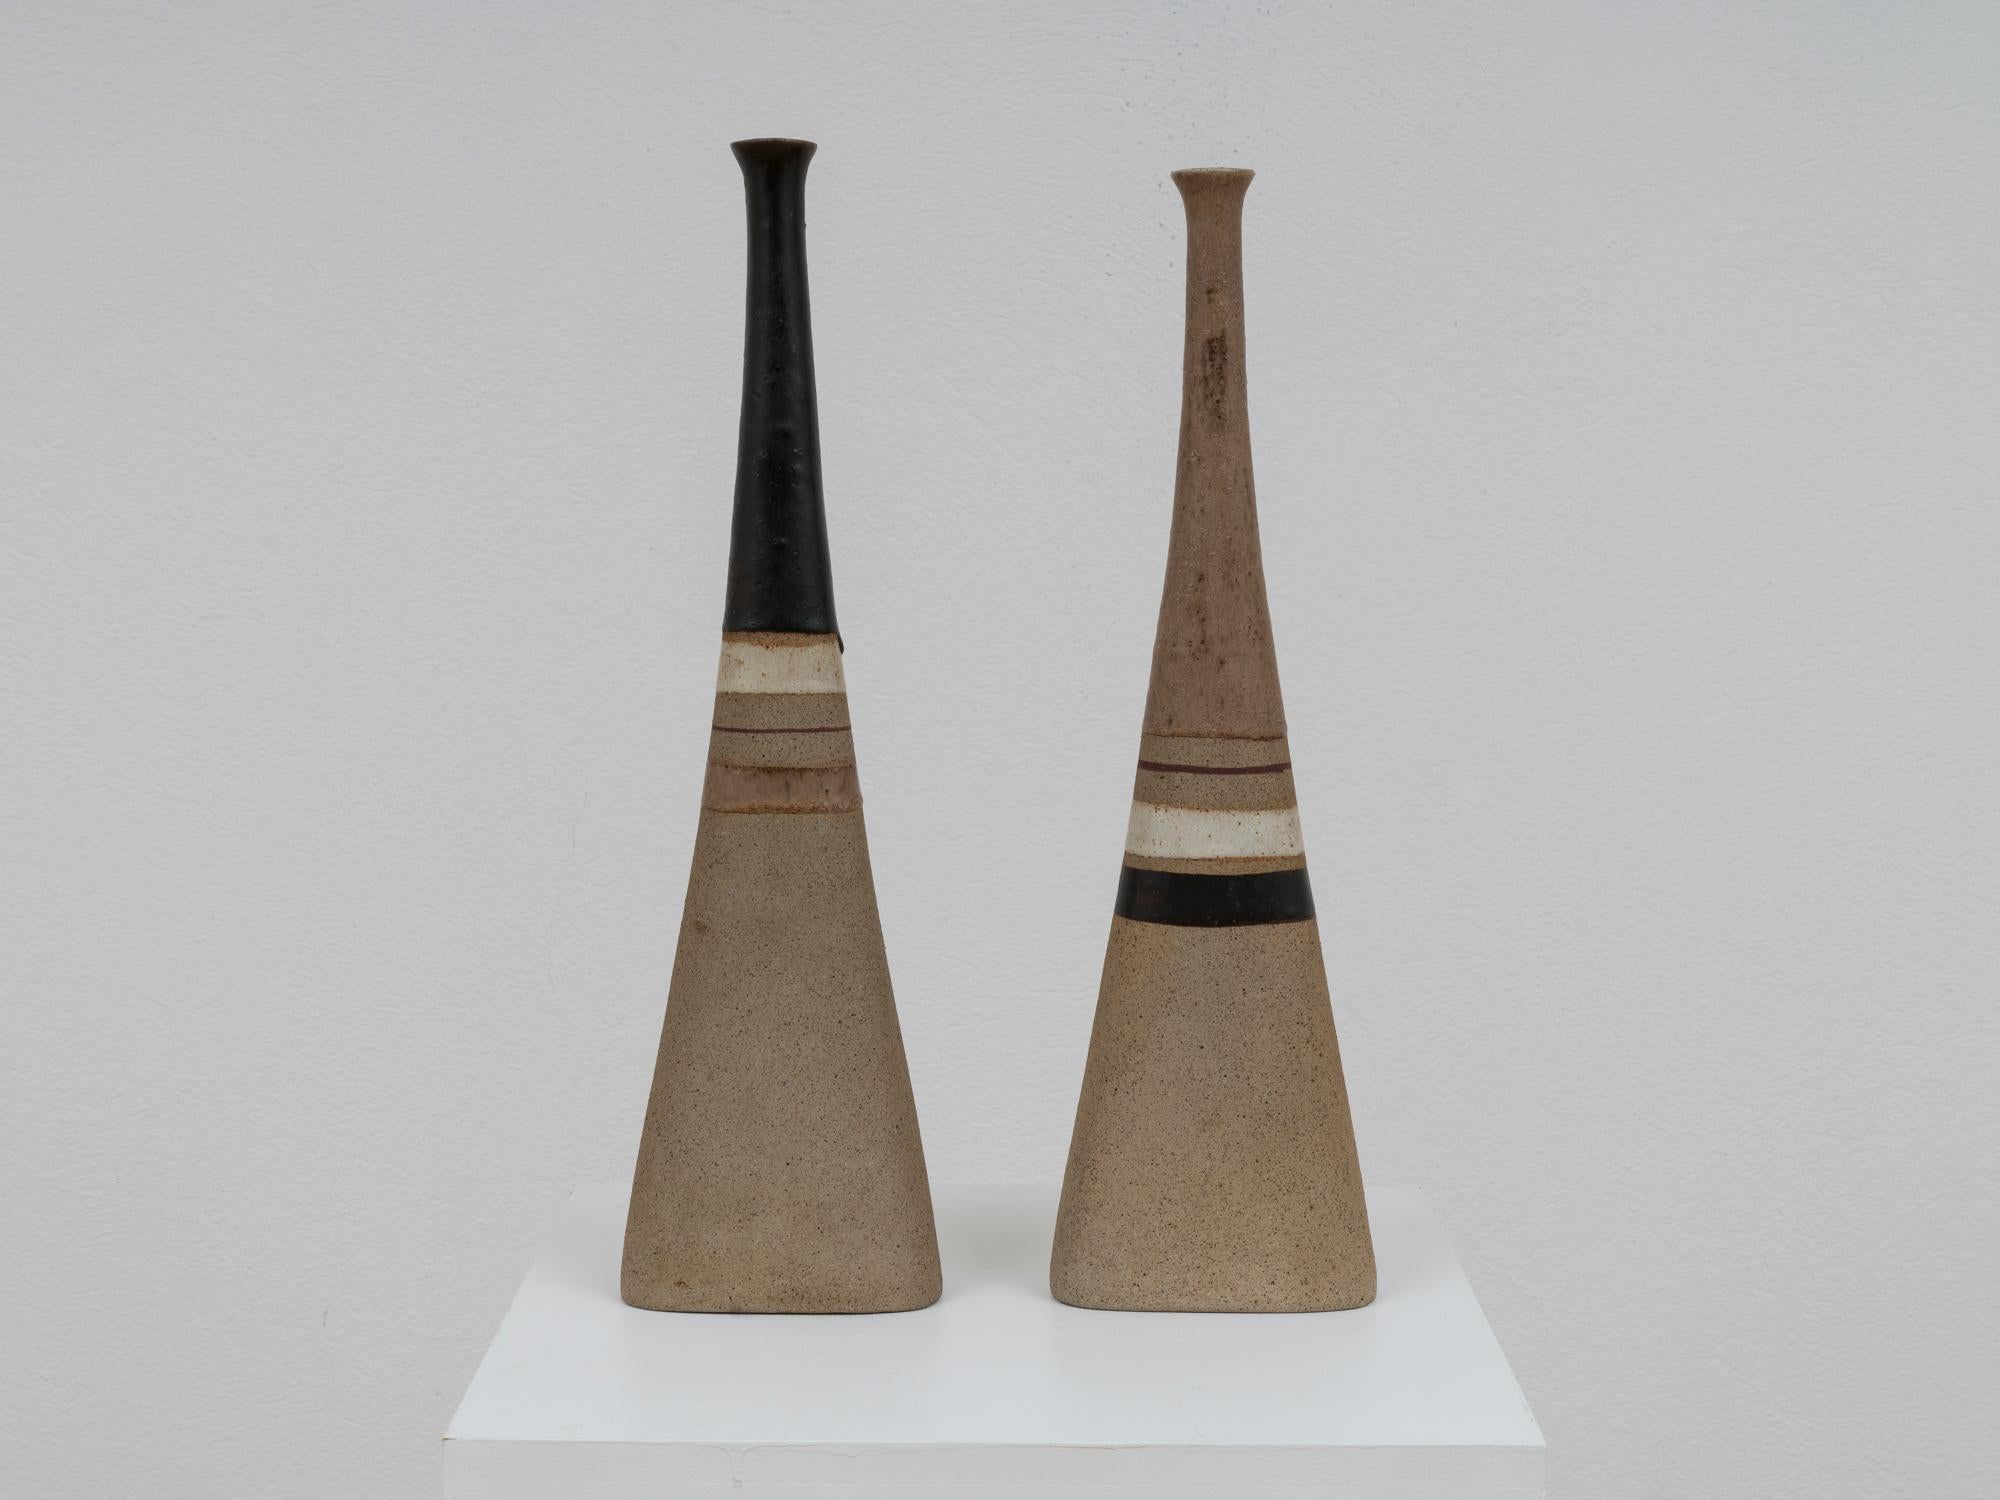 Pair of important Gambone vases, featuring a very recognizable striiped decor that has become iconic in the ceramic master's production. These pieces, with an apperance that misteriouly can be at the same time modern and ancient, stand as timeless